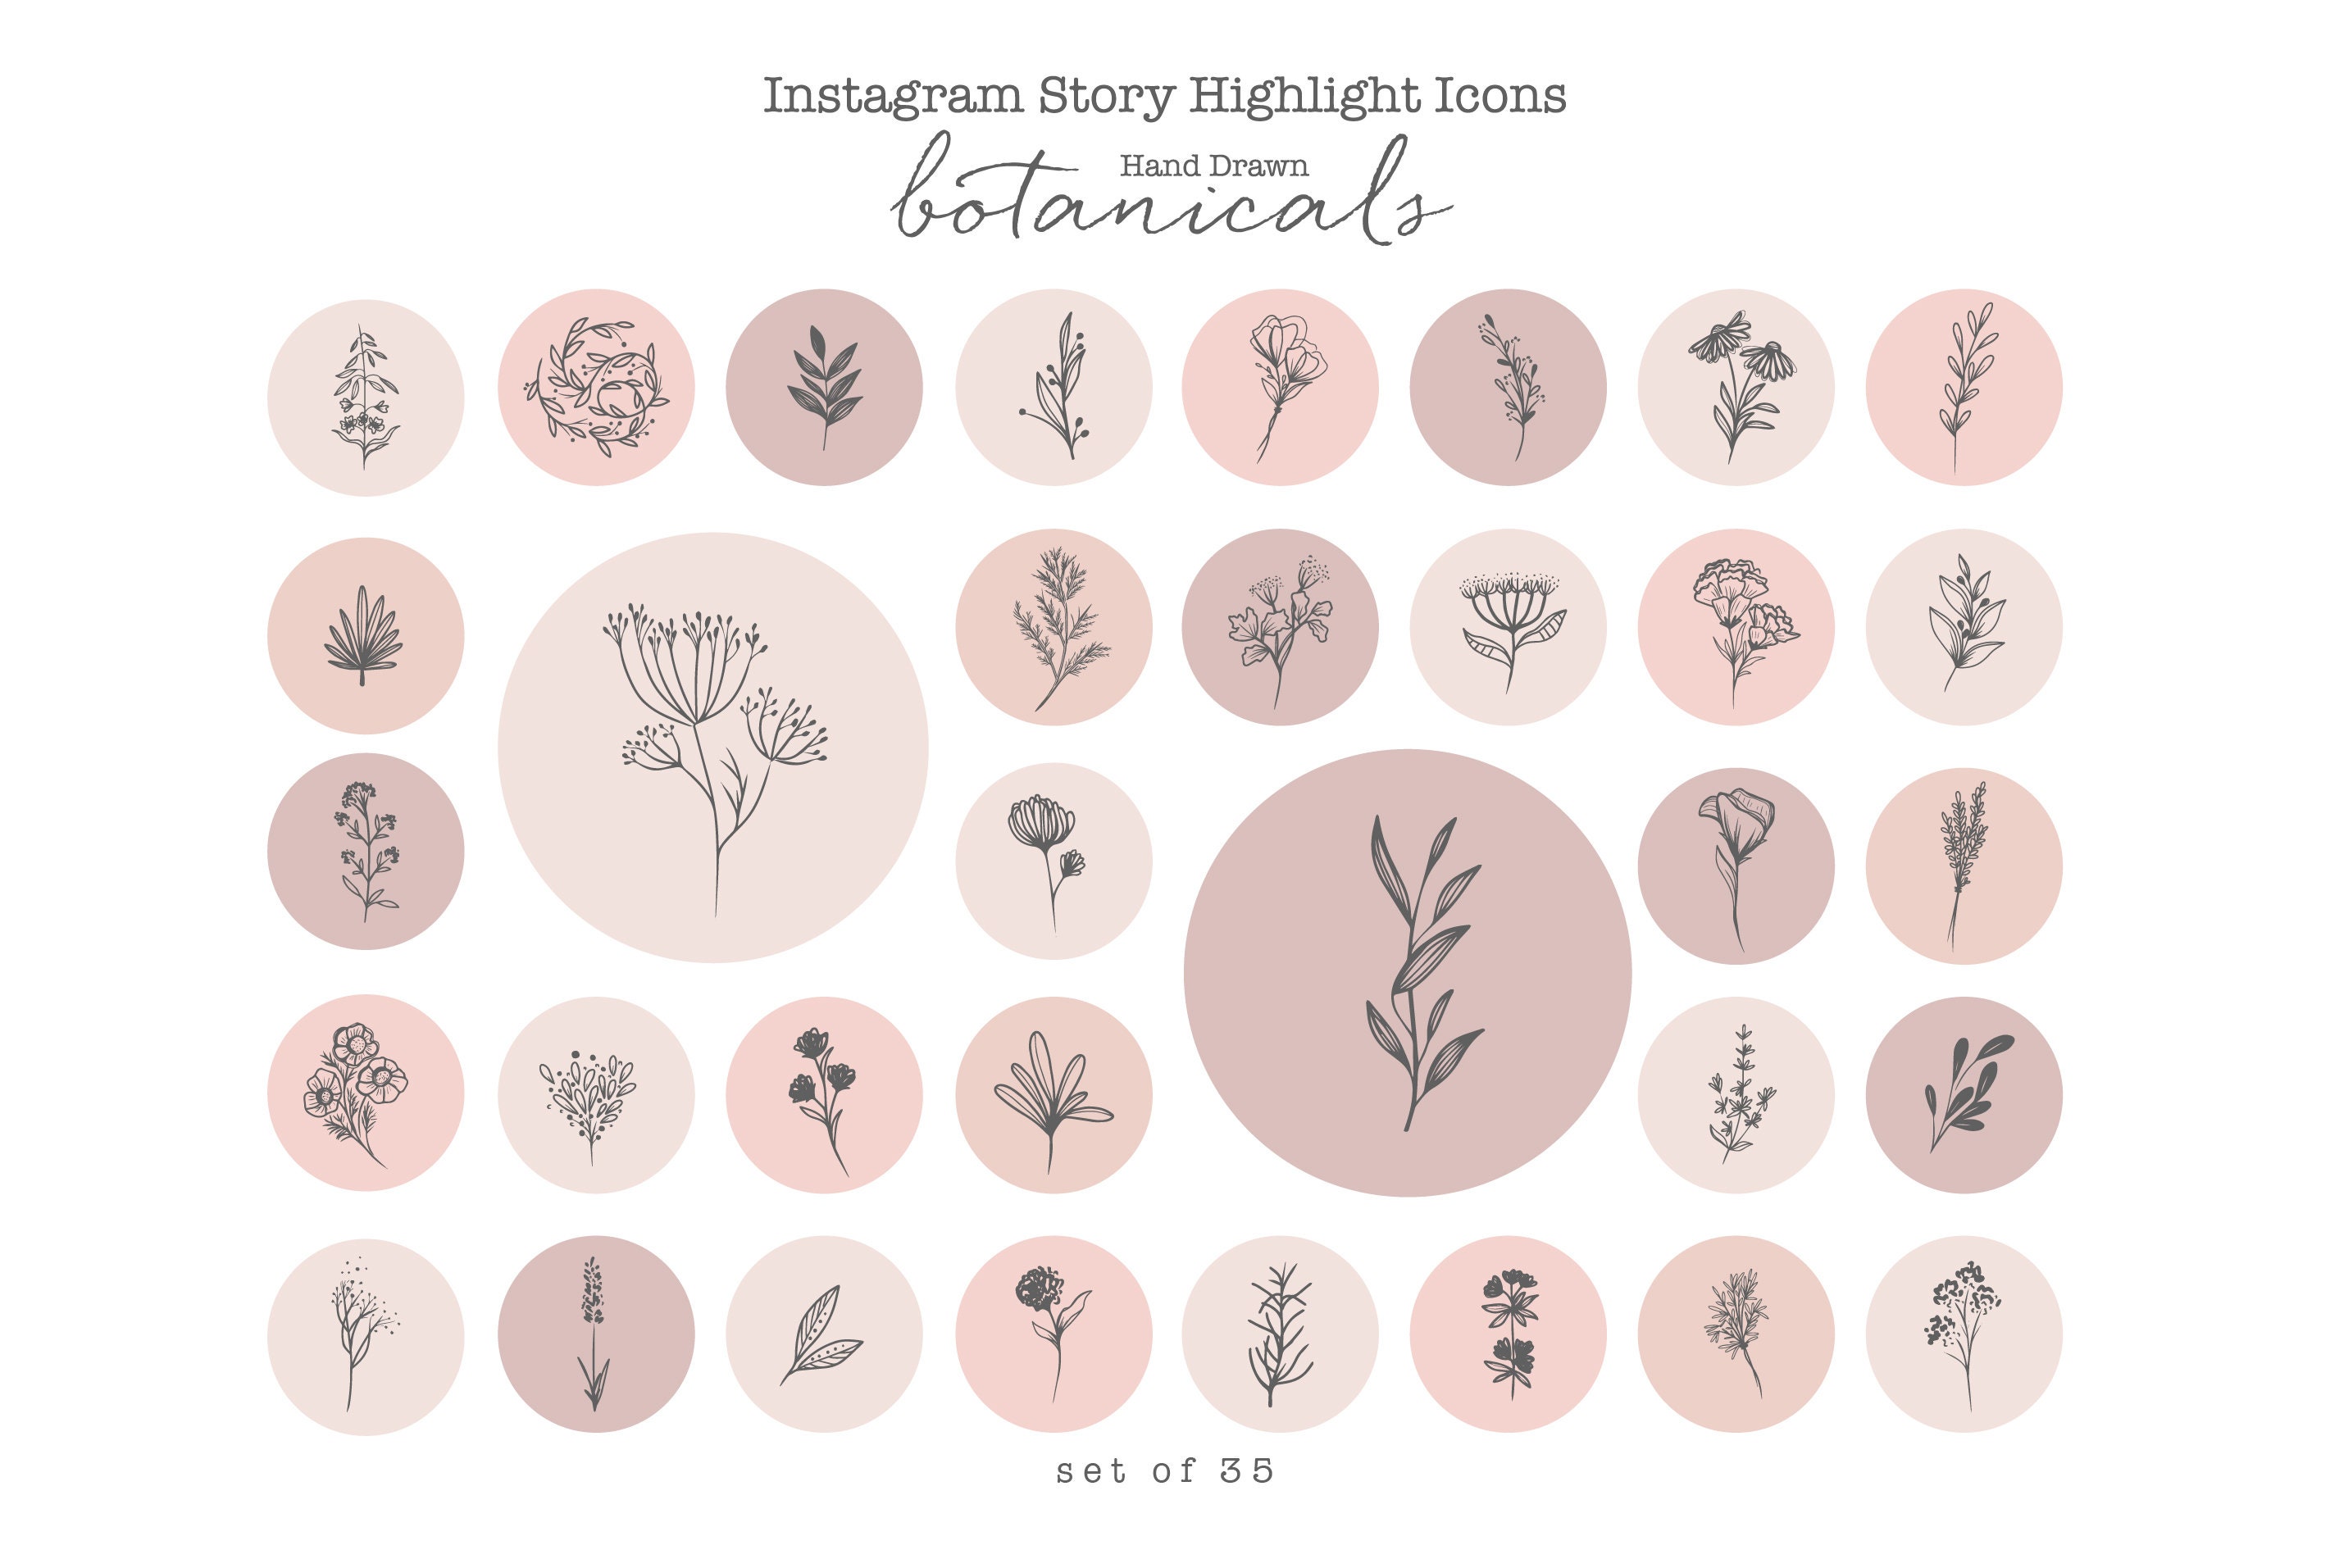 Dusty Pink Instagram Story Highlight Icons Hand Drawn Sketch | Etsy